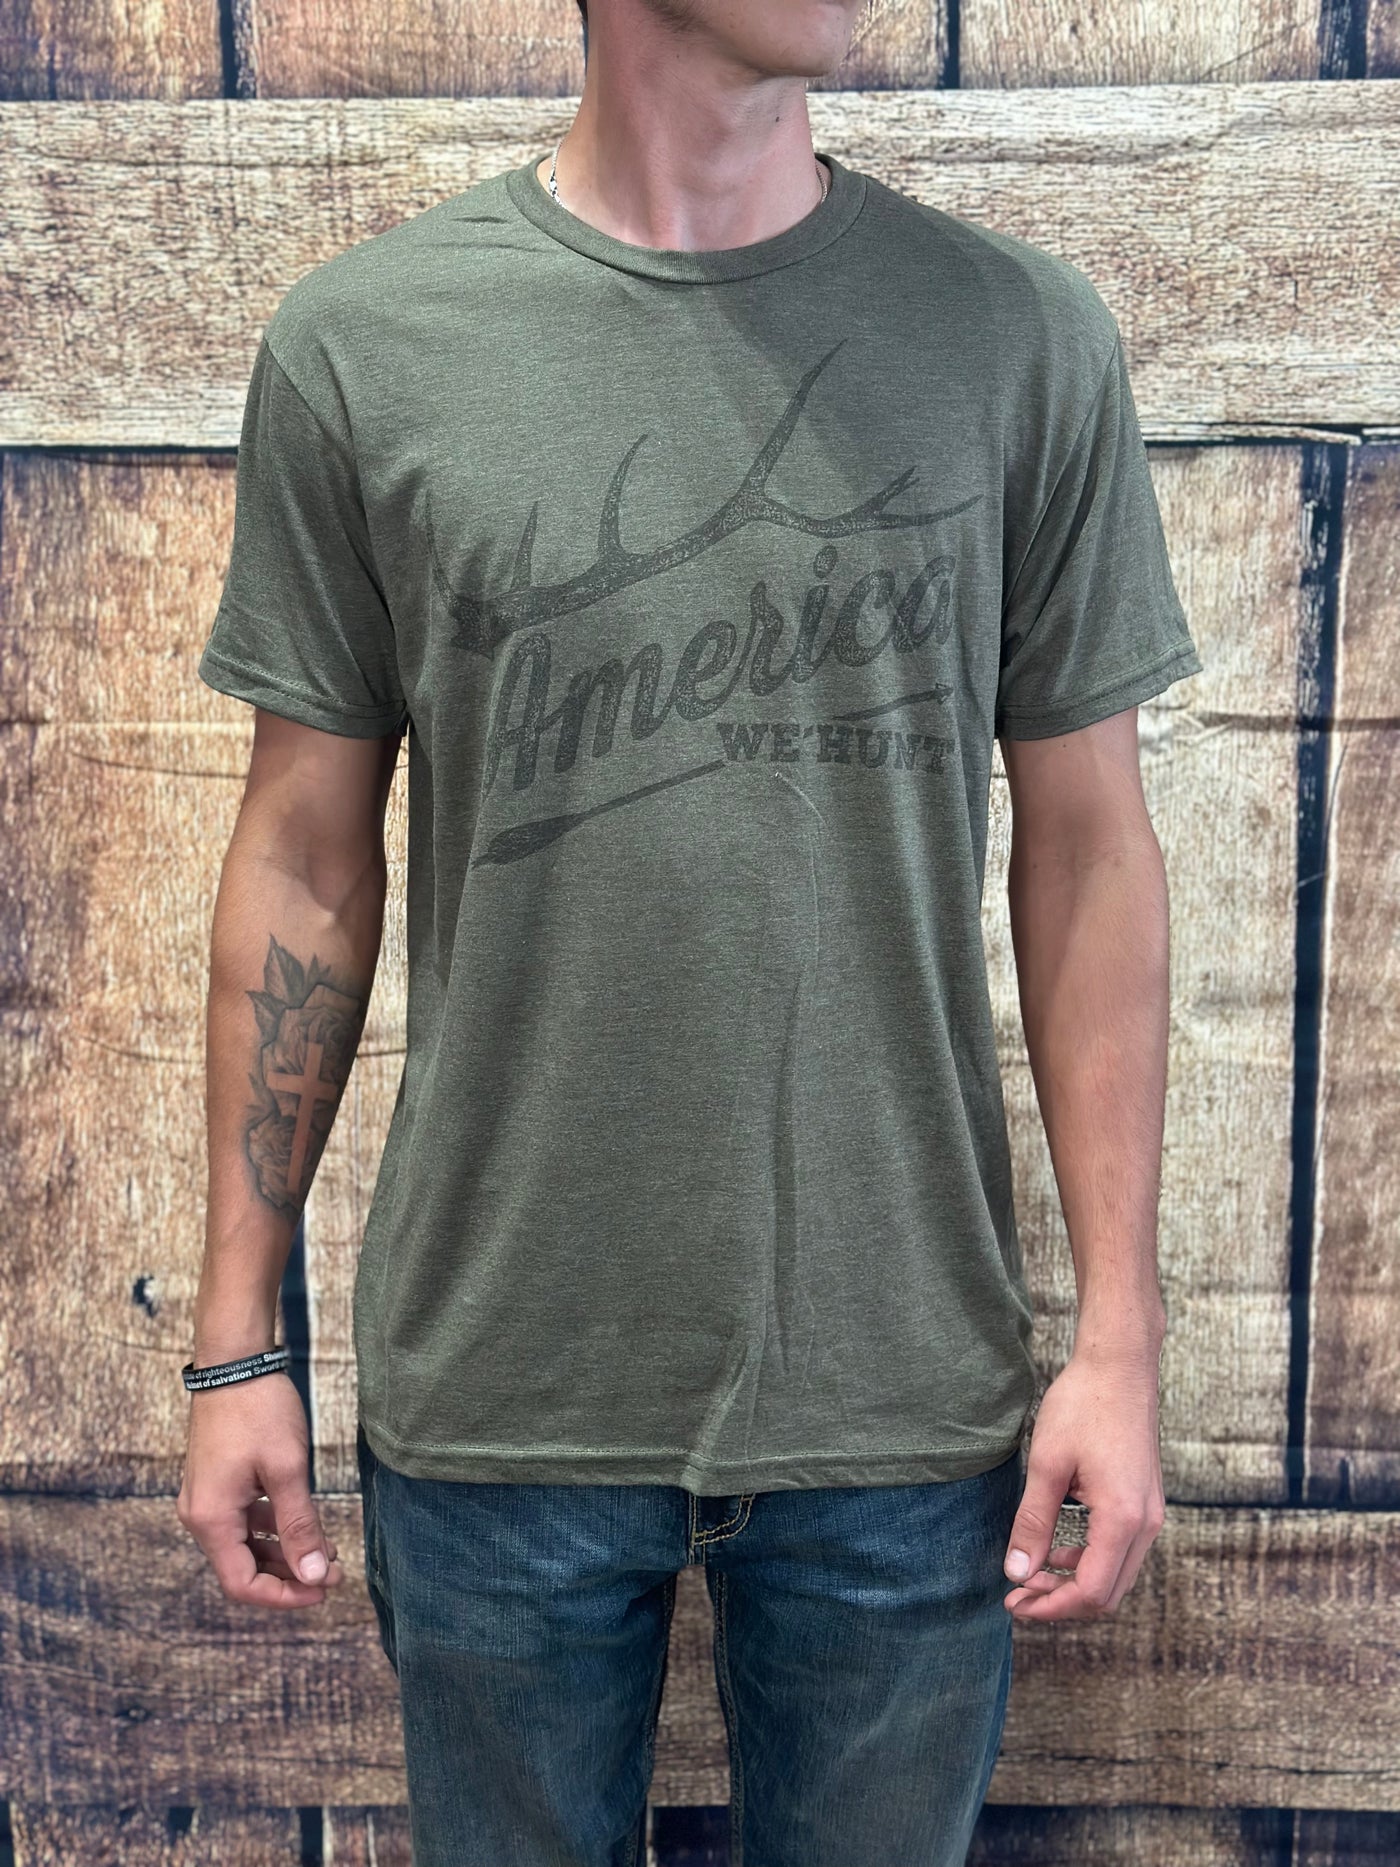 American We Hunt Graphic Tee in Military Green